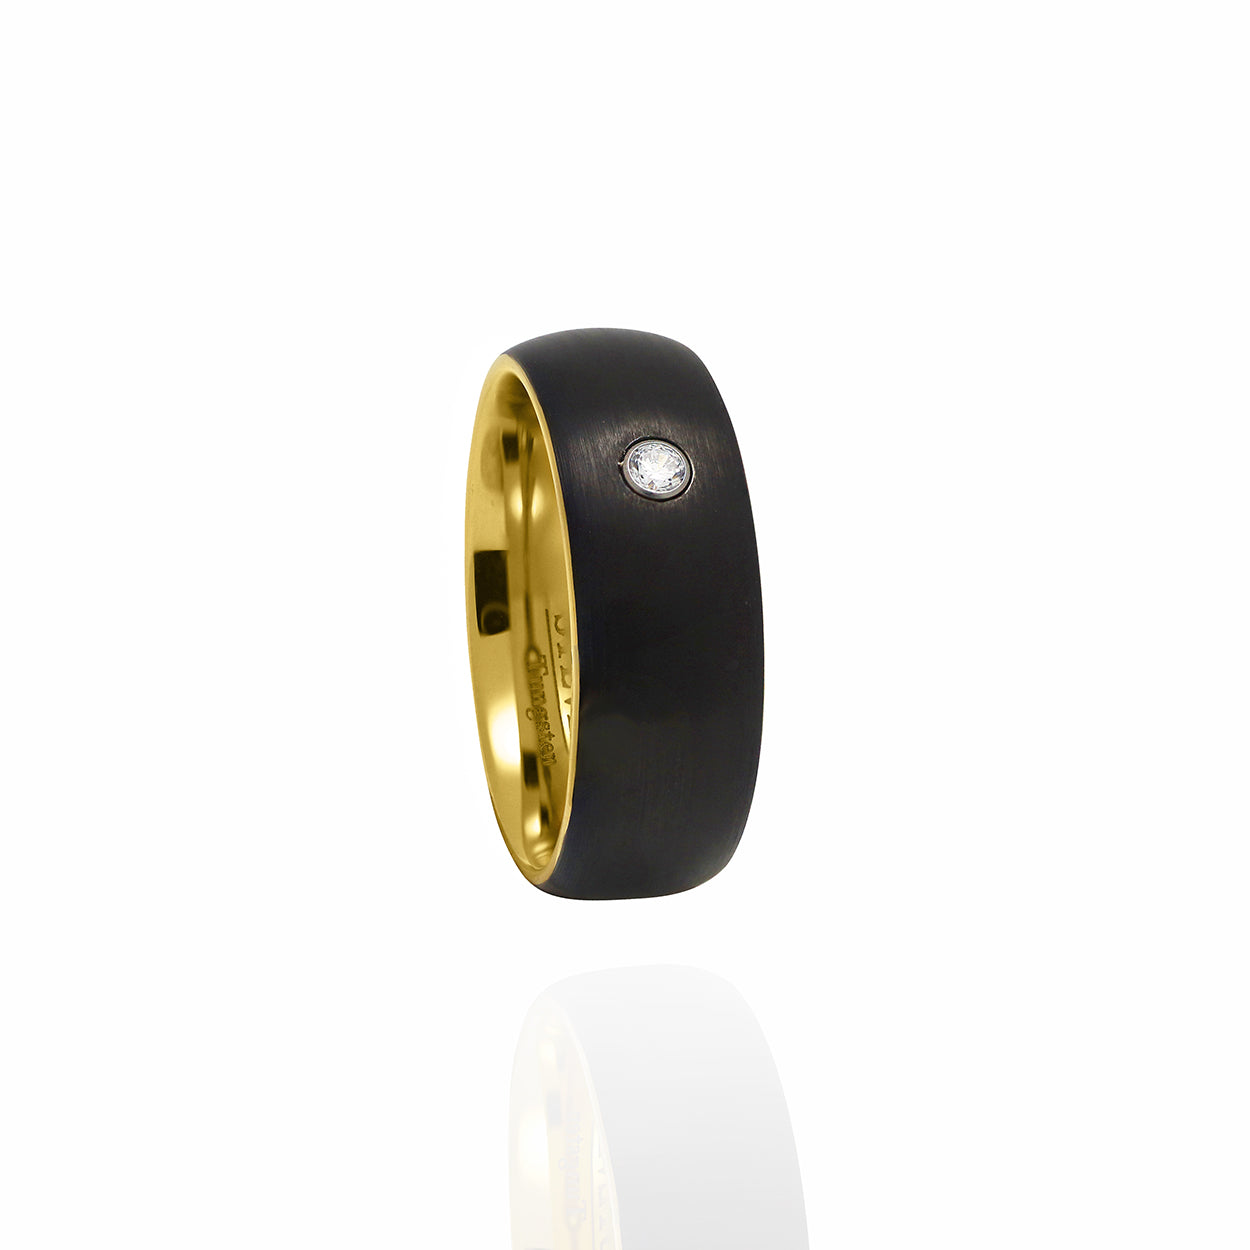 Black Tungsten Carbide Ring with a Brushed Finish and a Yellow-Gold Plated Inlay and one set Cubic Zirconia